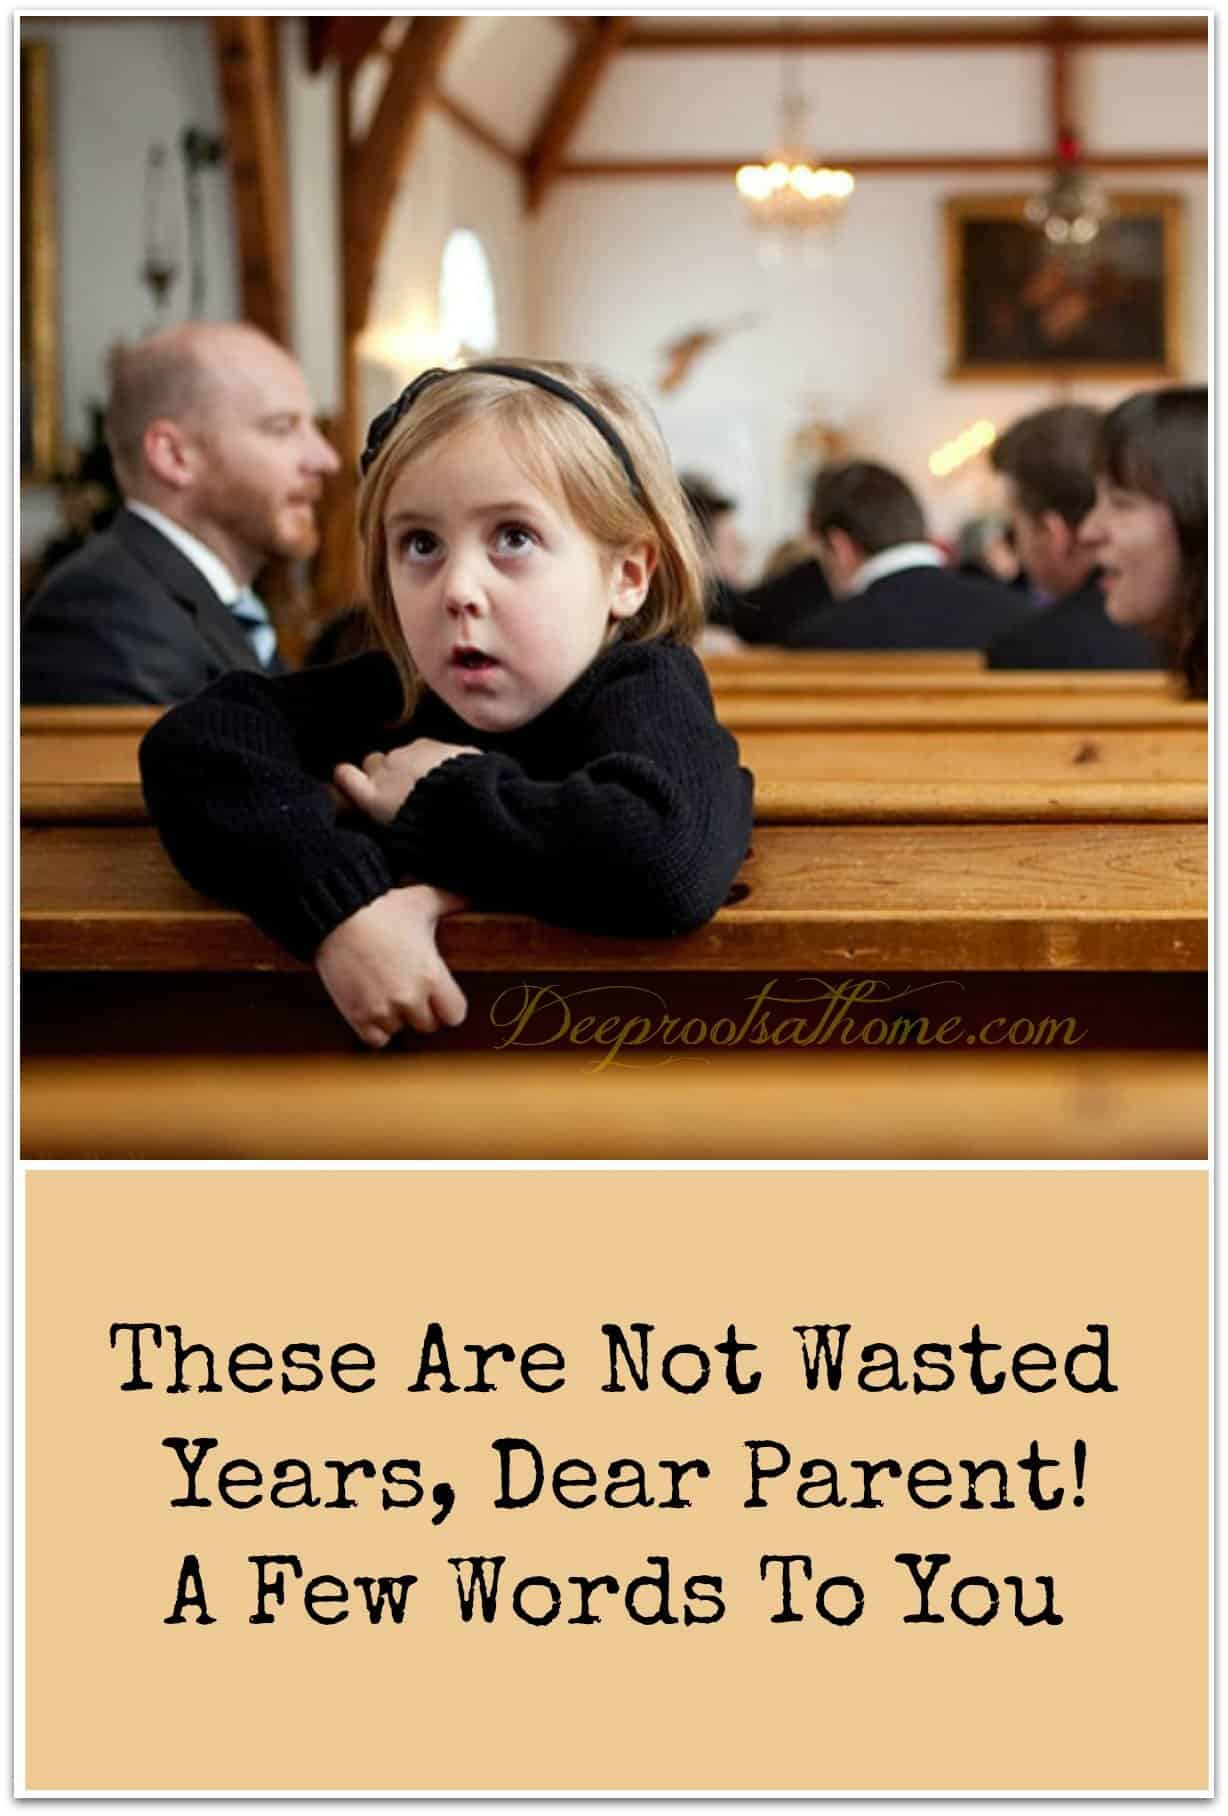 These Are Not Wasted Years, Dear Parent! A Few Words To You